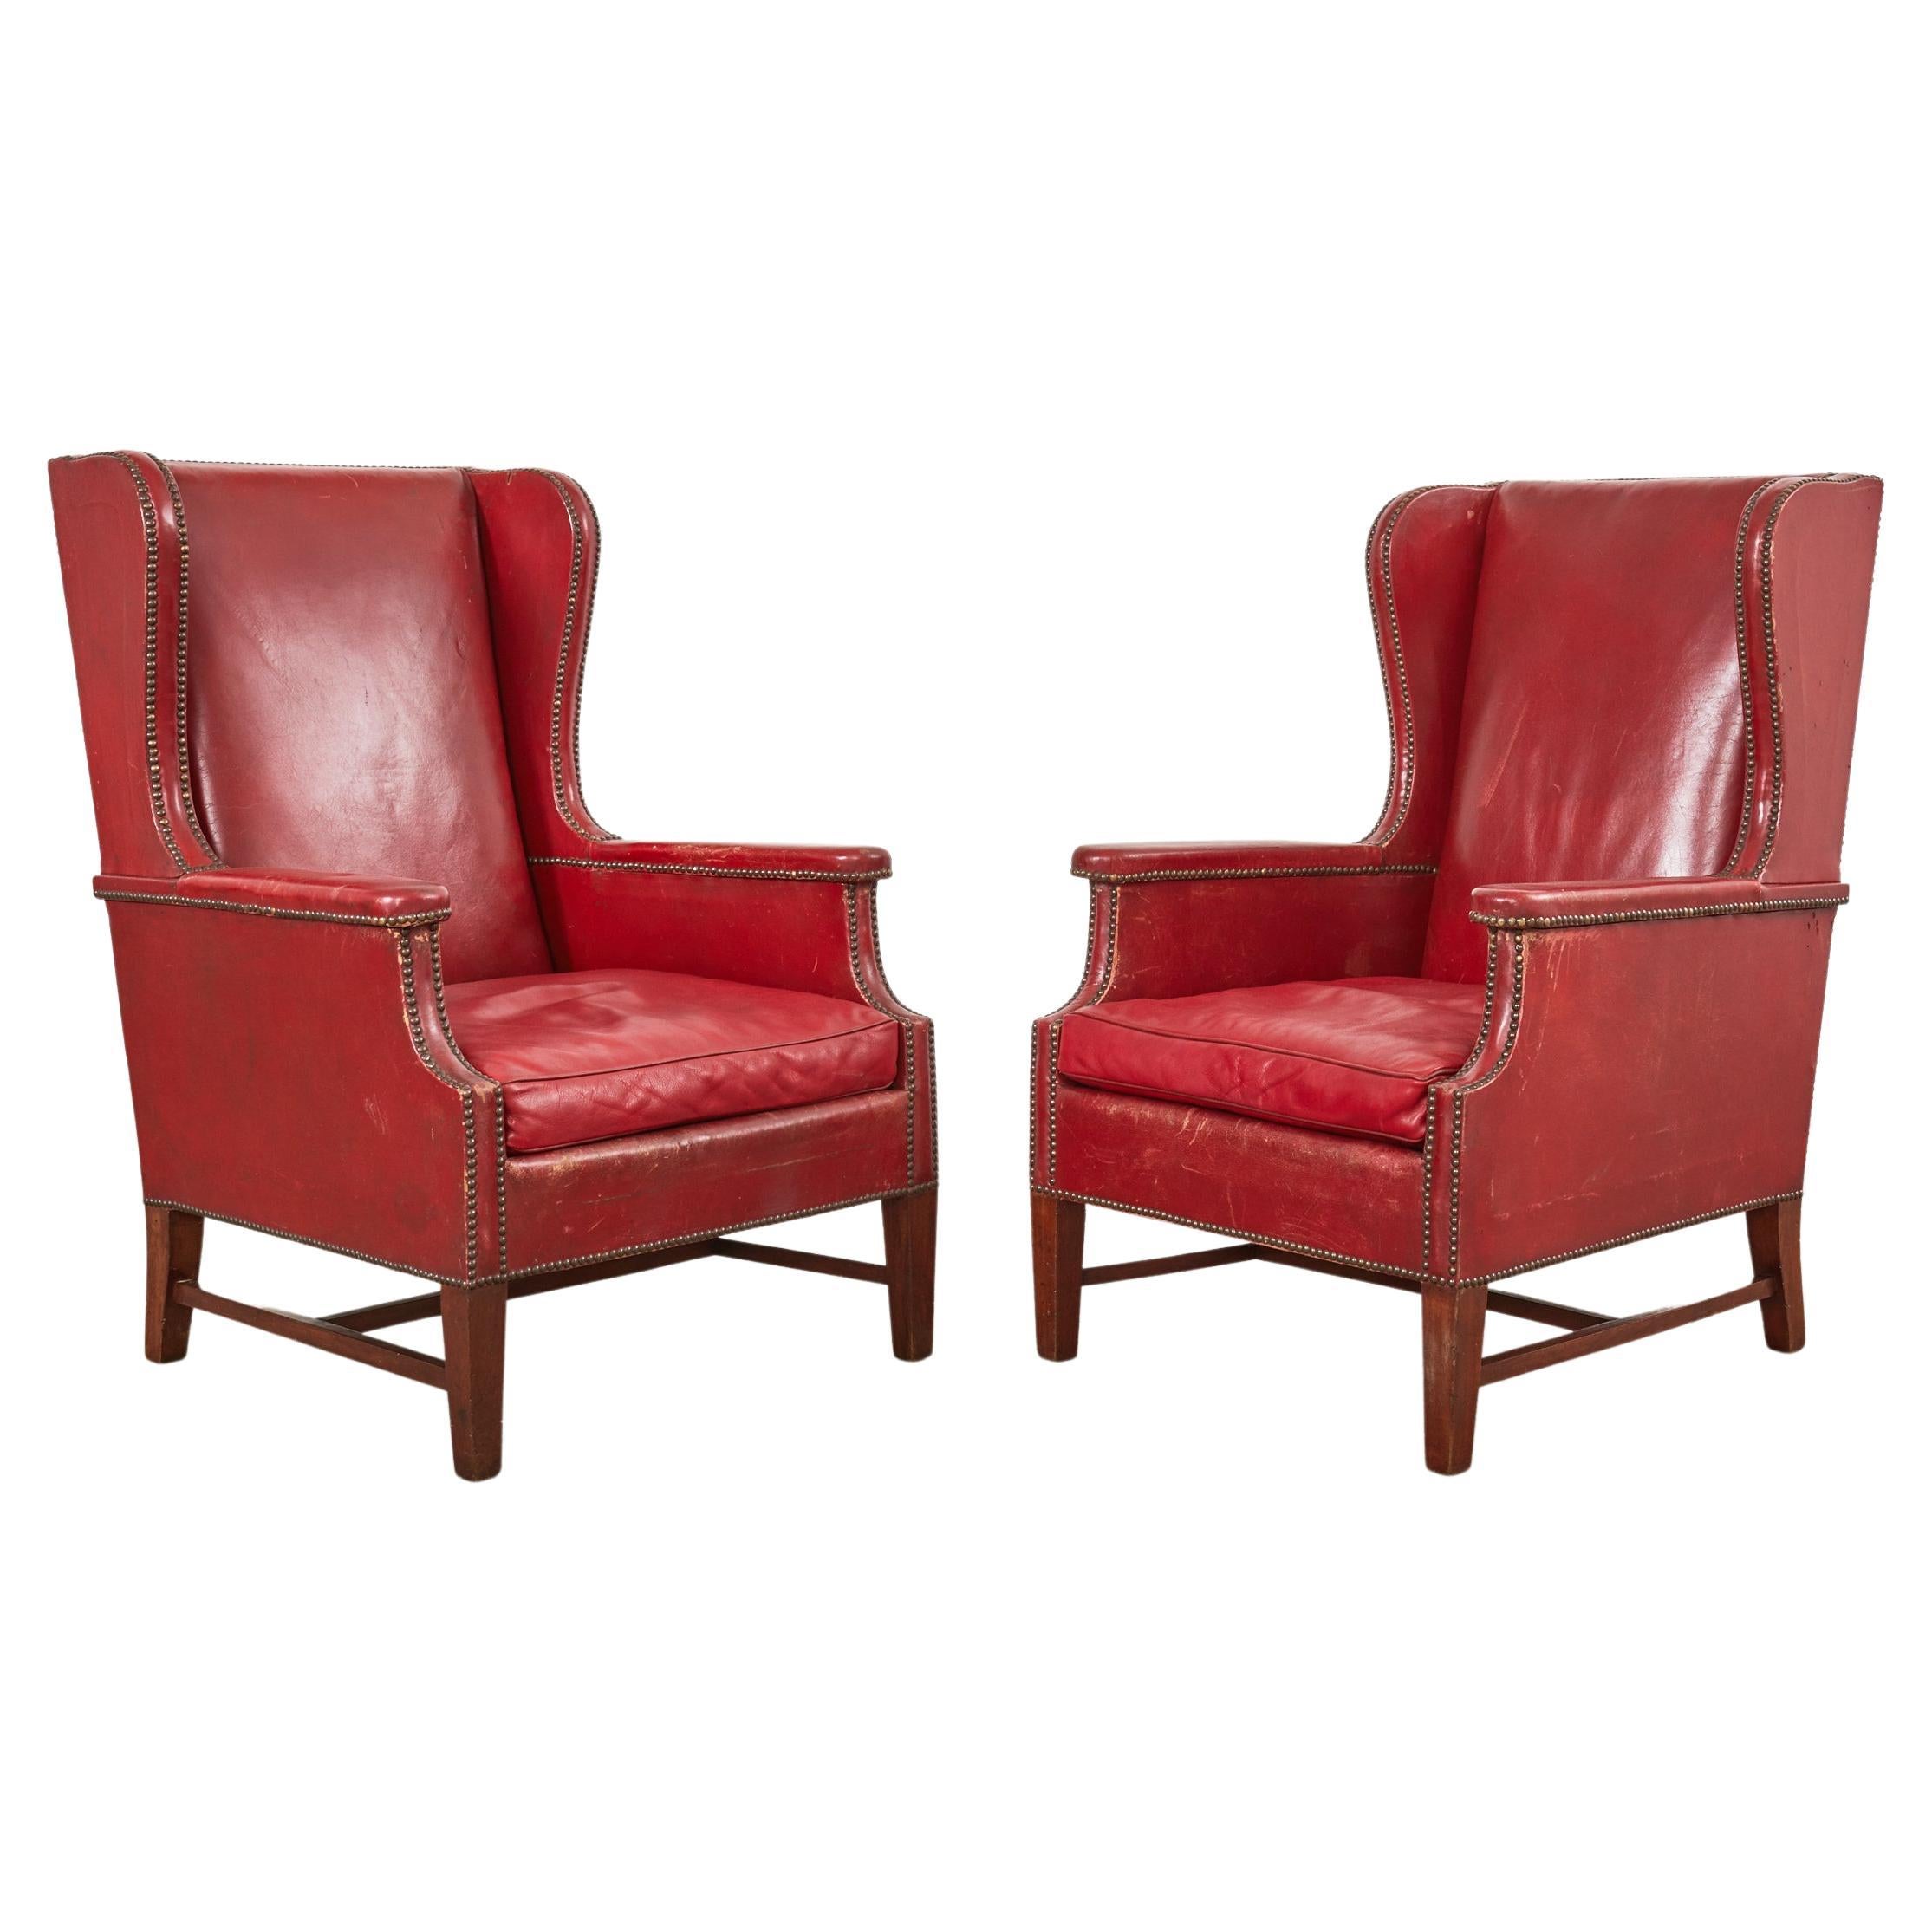 Pair of French Art Deco Cherry Red Leather Wingback Chairs For Sale